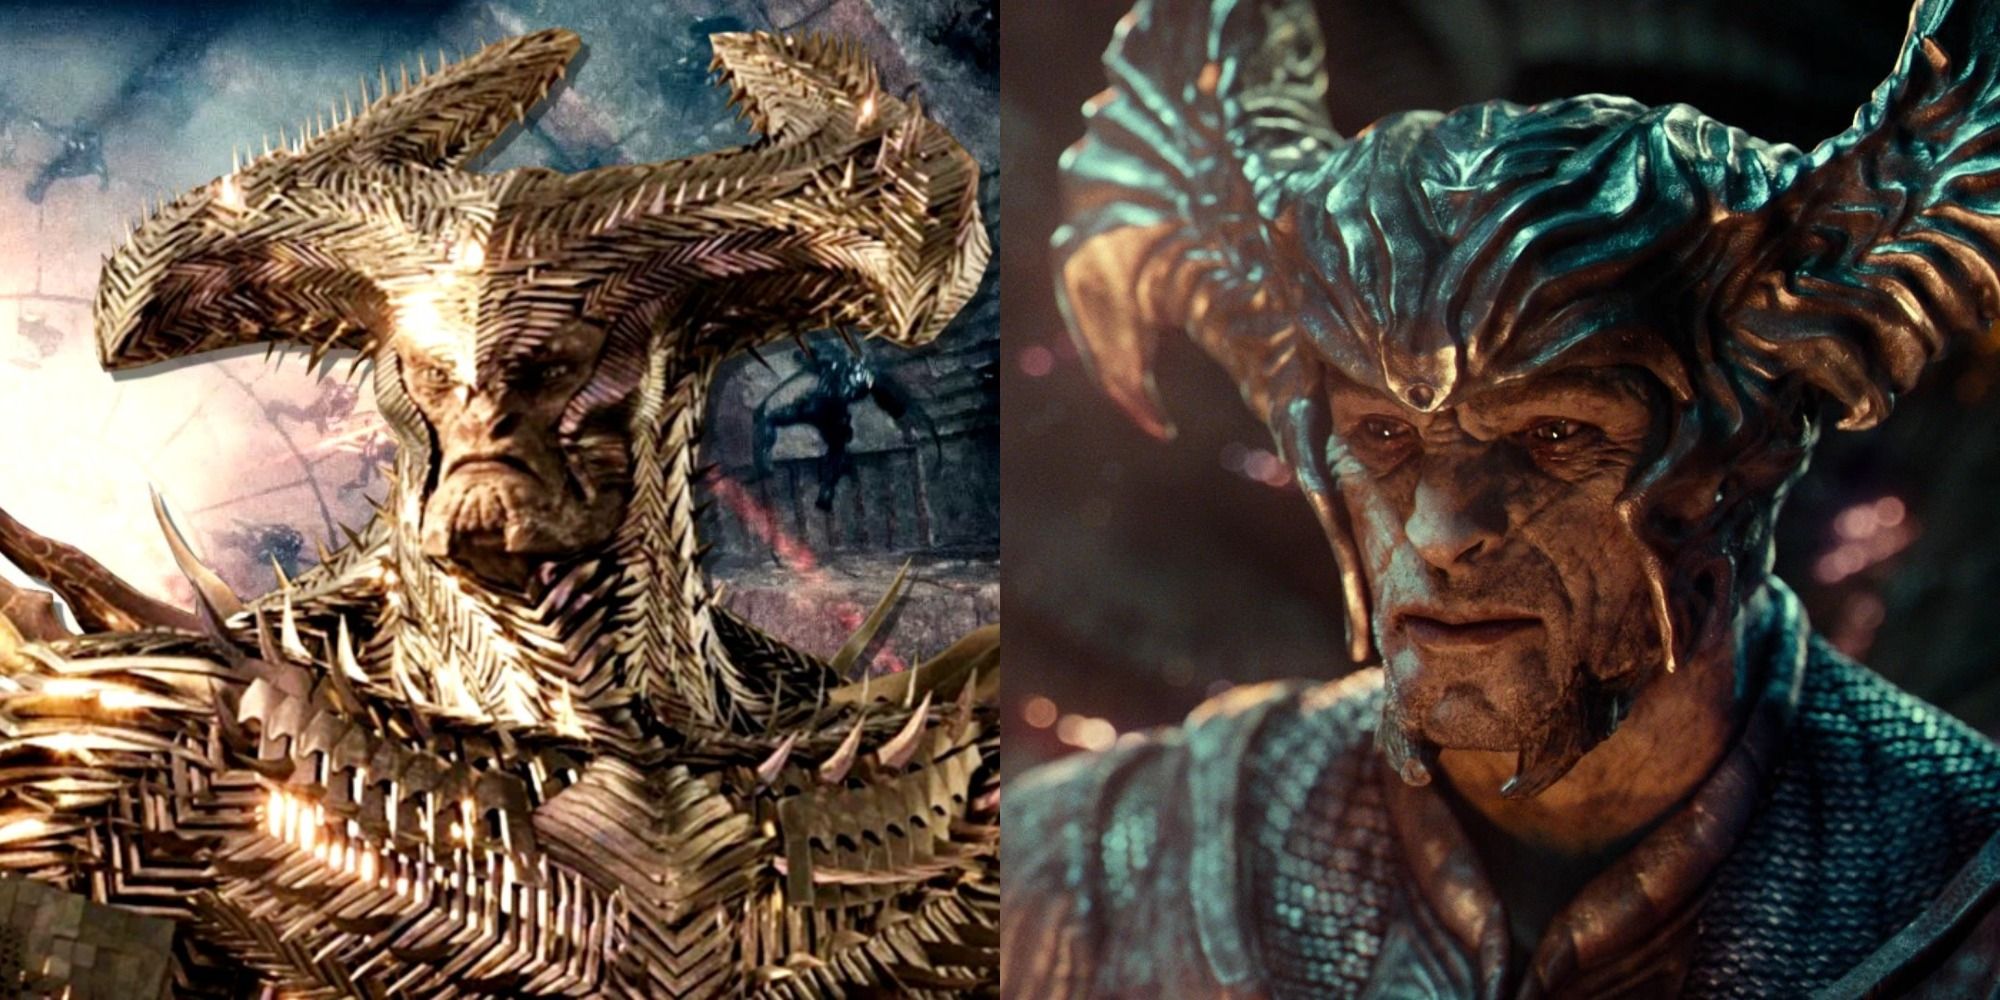 Zack Snyder S Justice League 5 Ways Steppenwolf Has Changed 5 Ways He S The Same